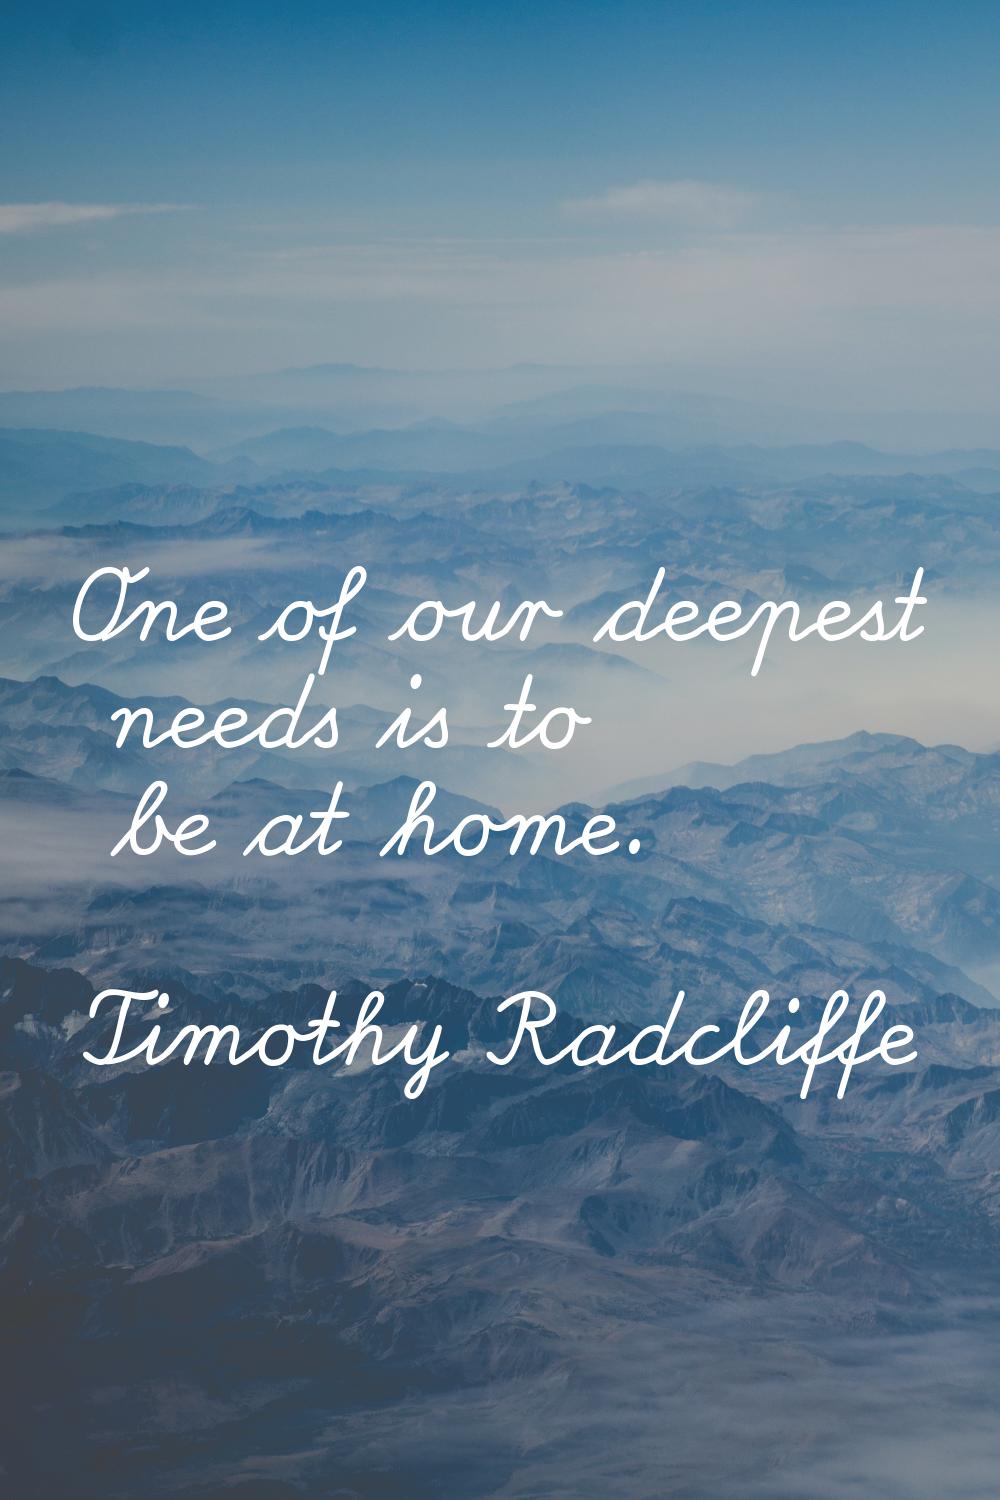 One of our deepest needs is to be at home.